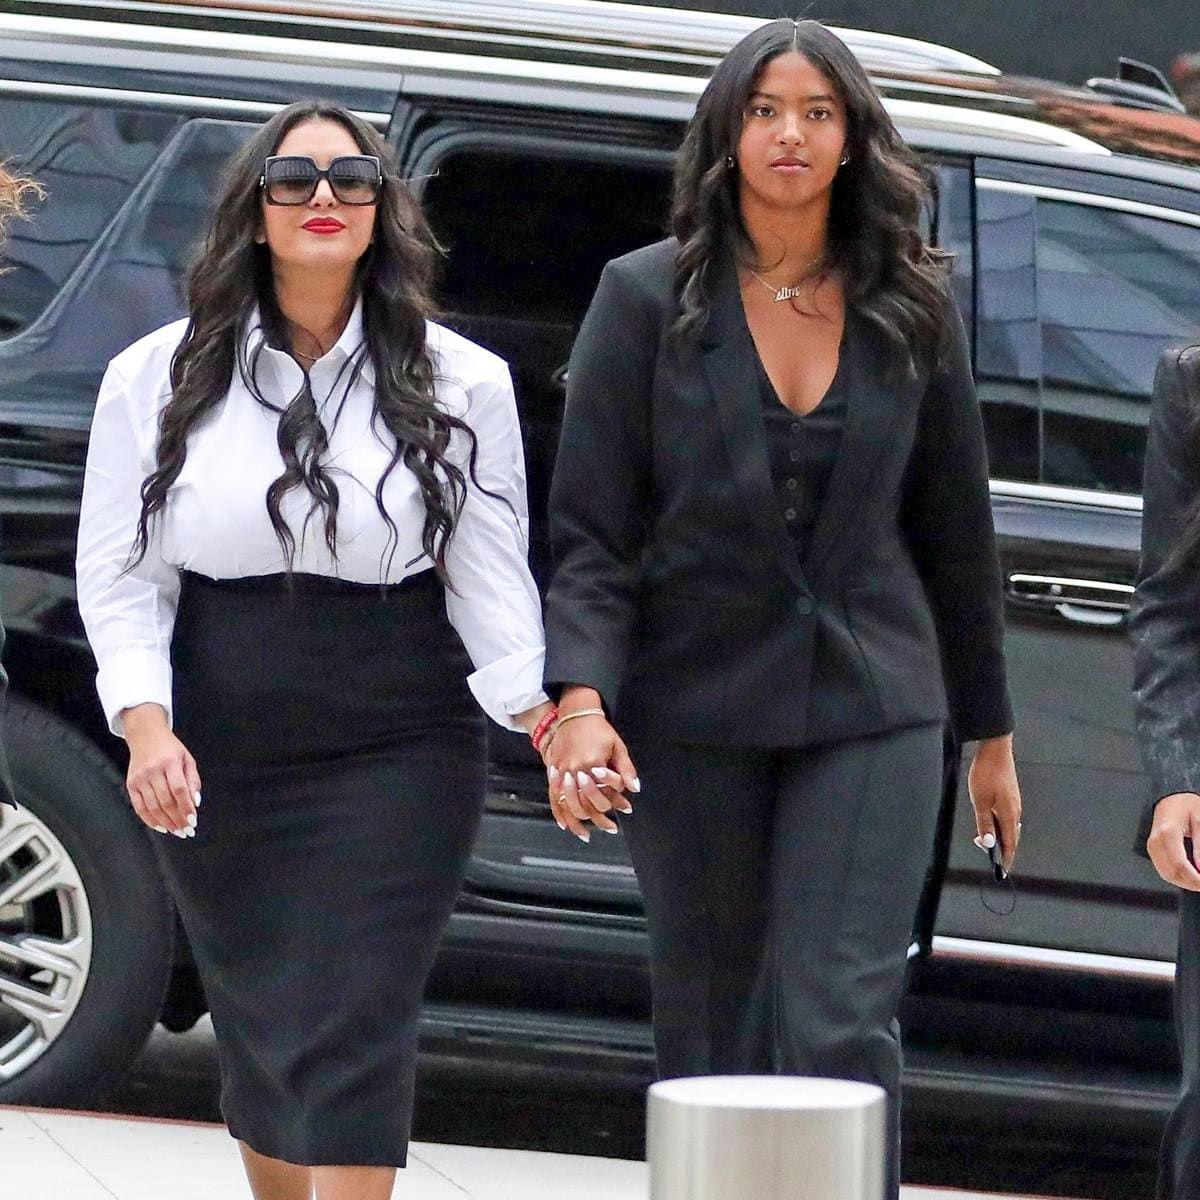 Vanessa Bryant arrived to court with her daughter Natalia